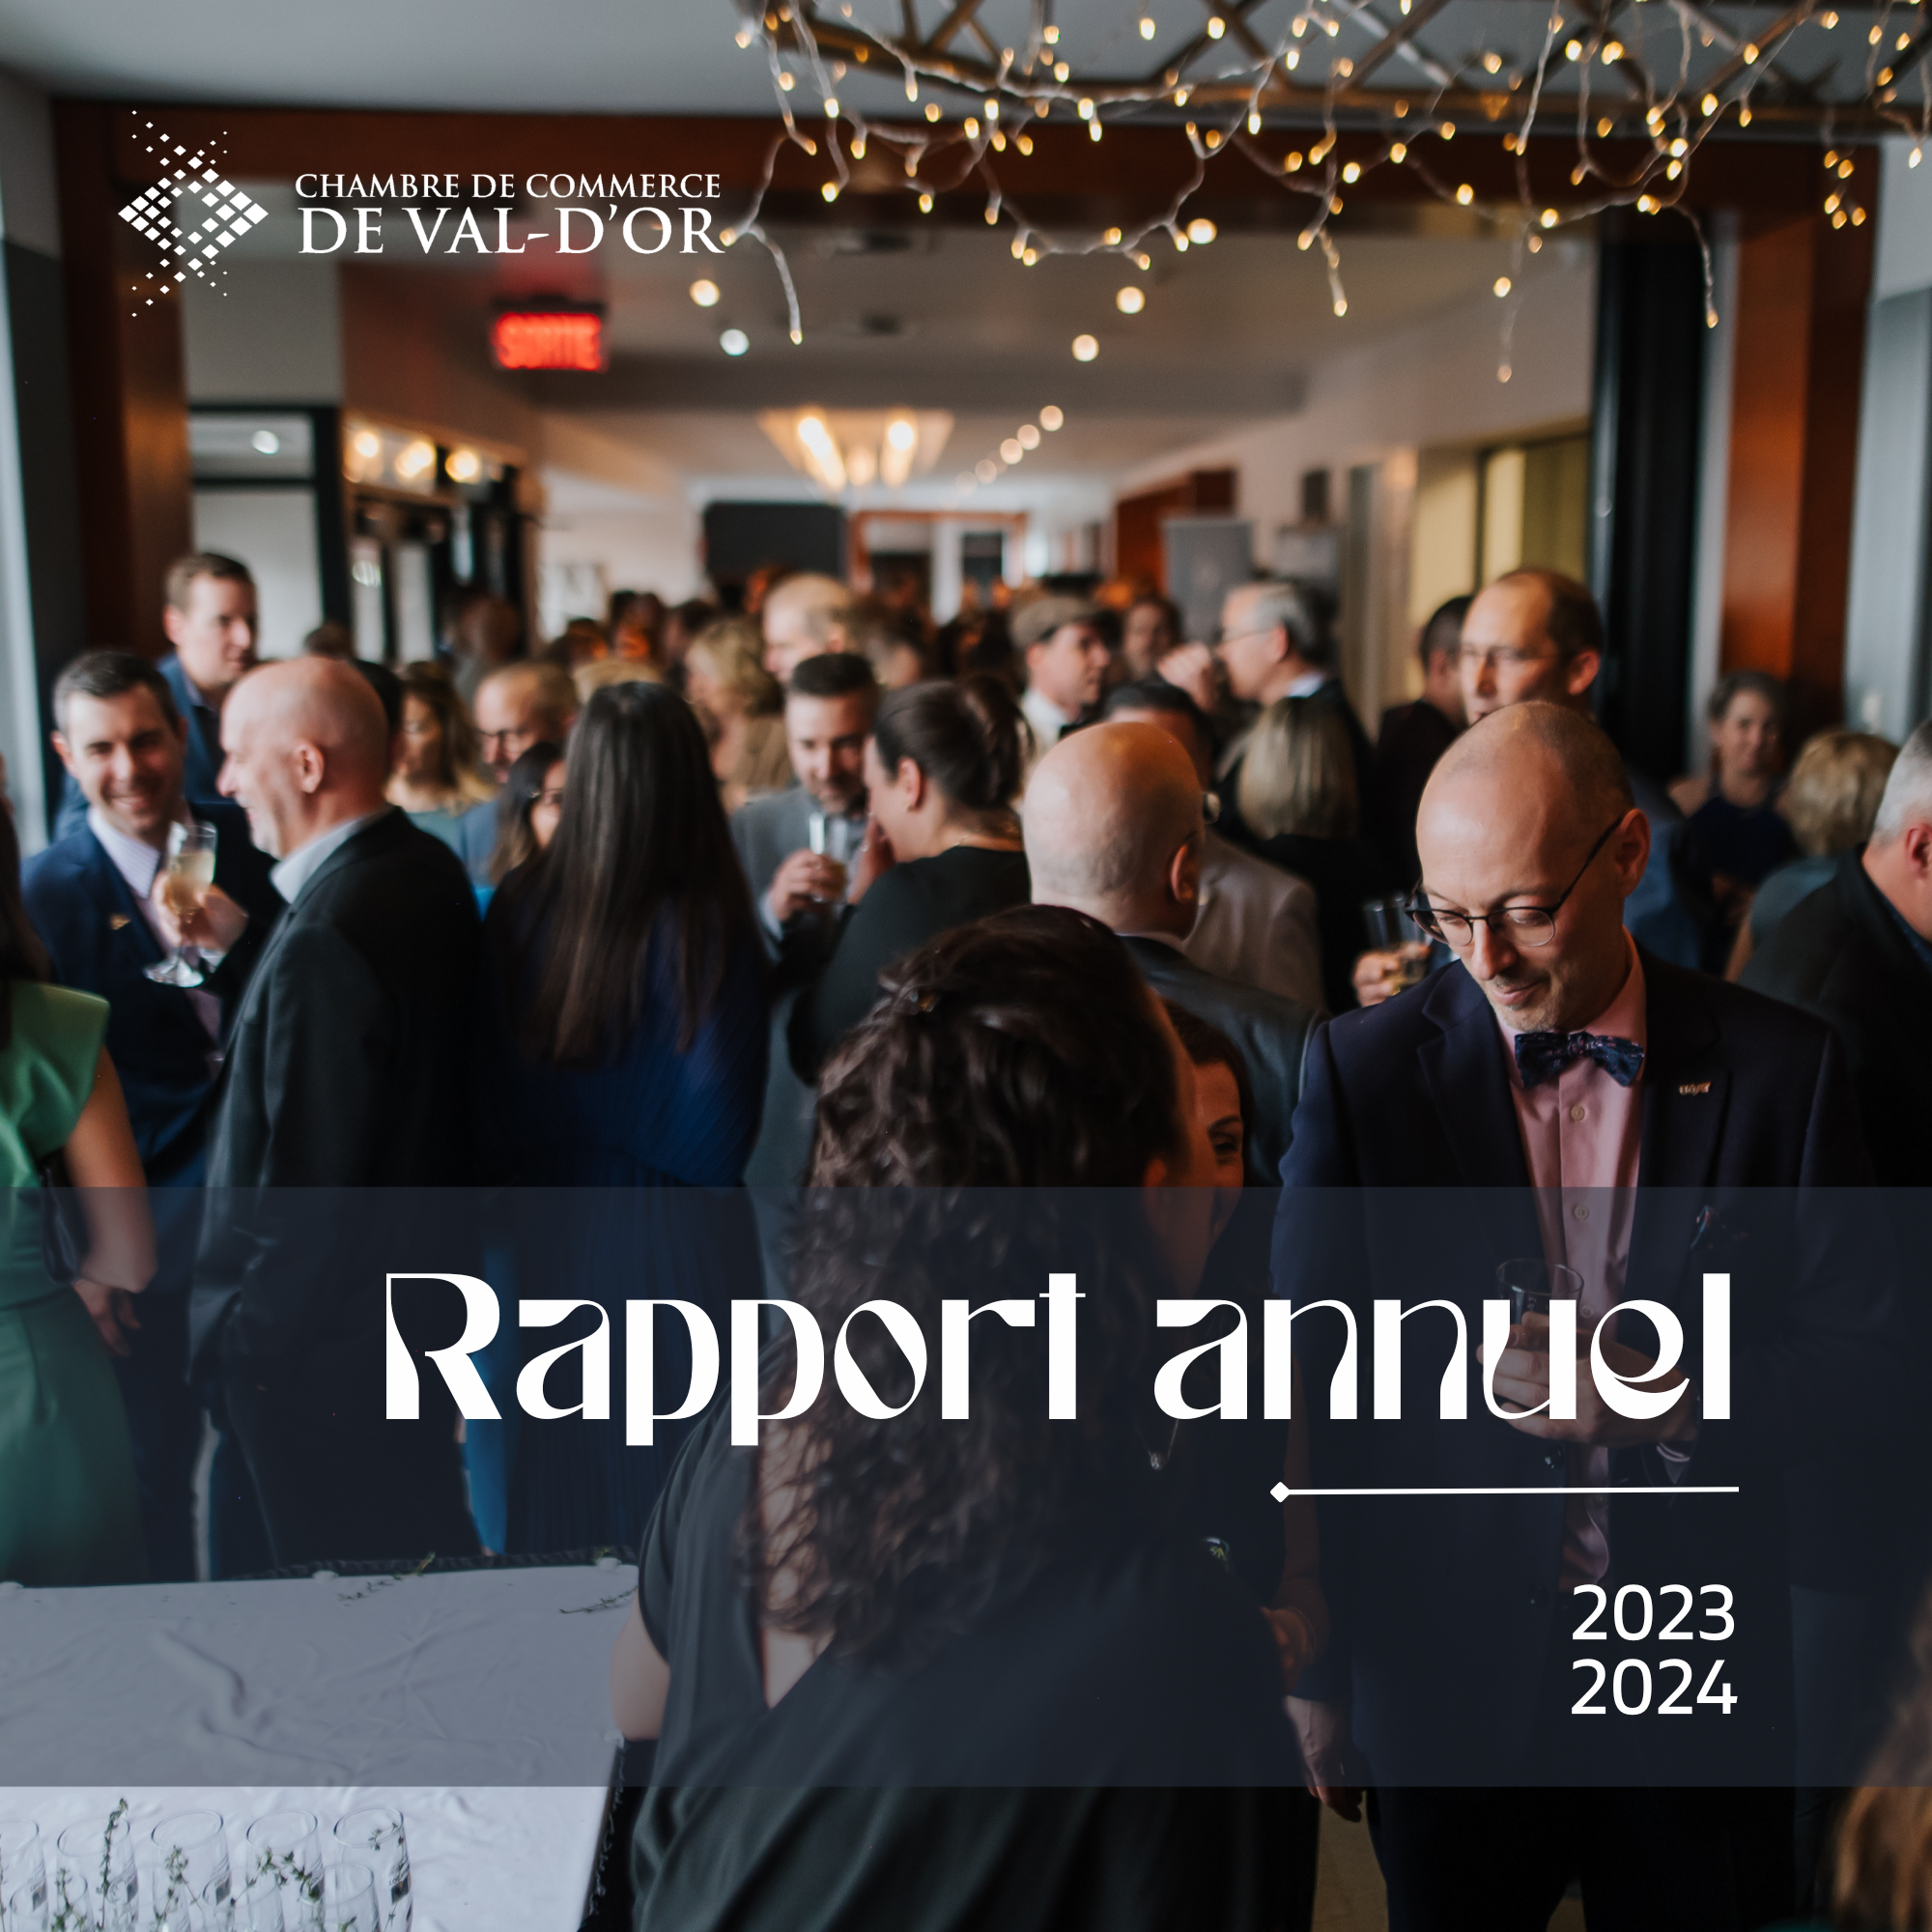 CCVD Rapport annuel 2019-2020